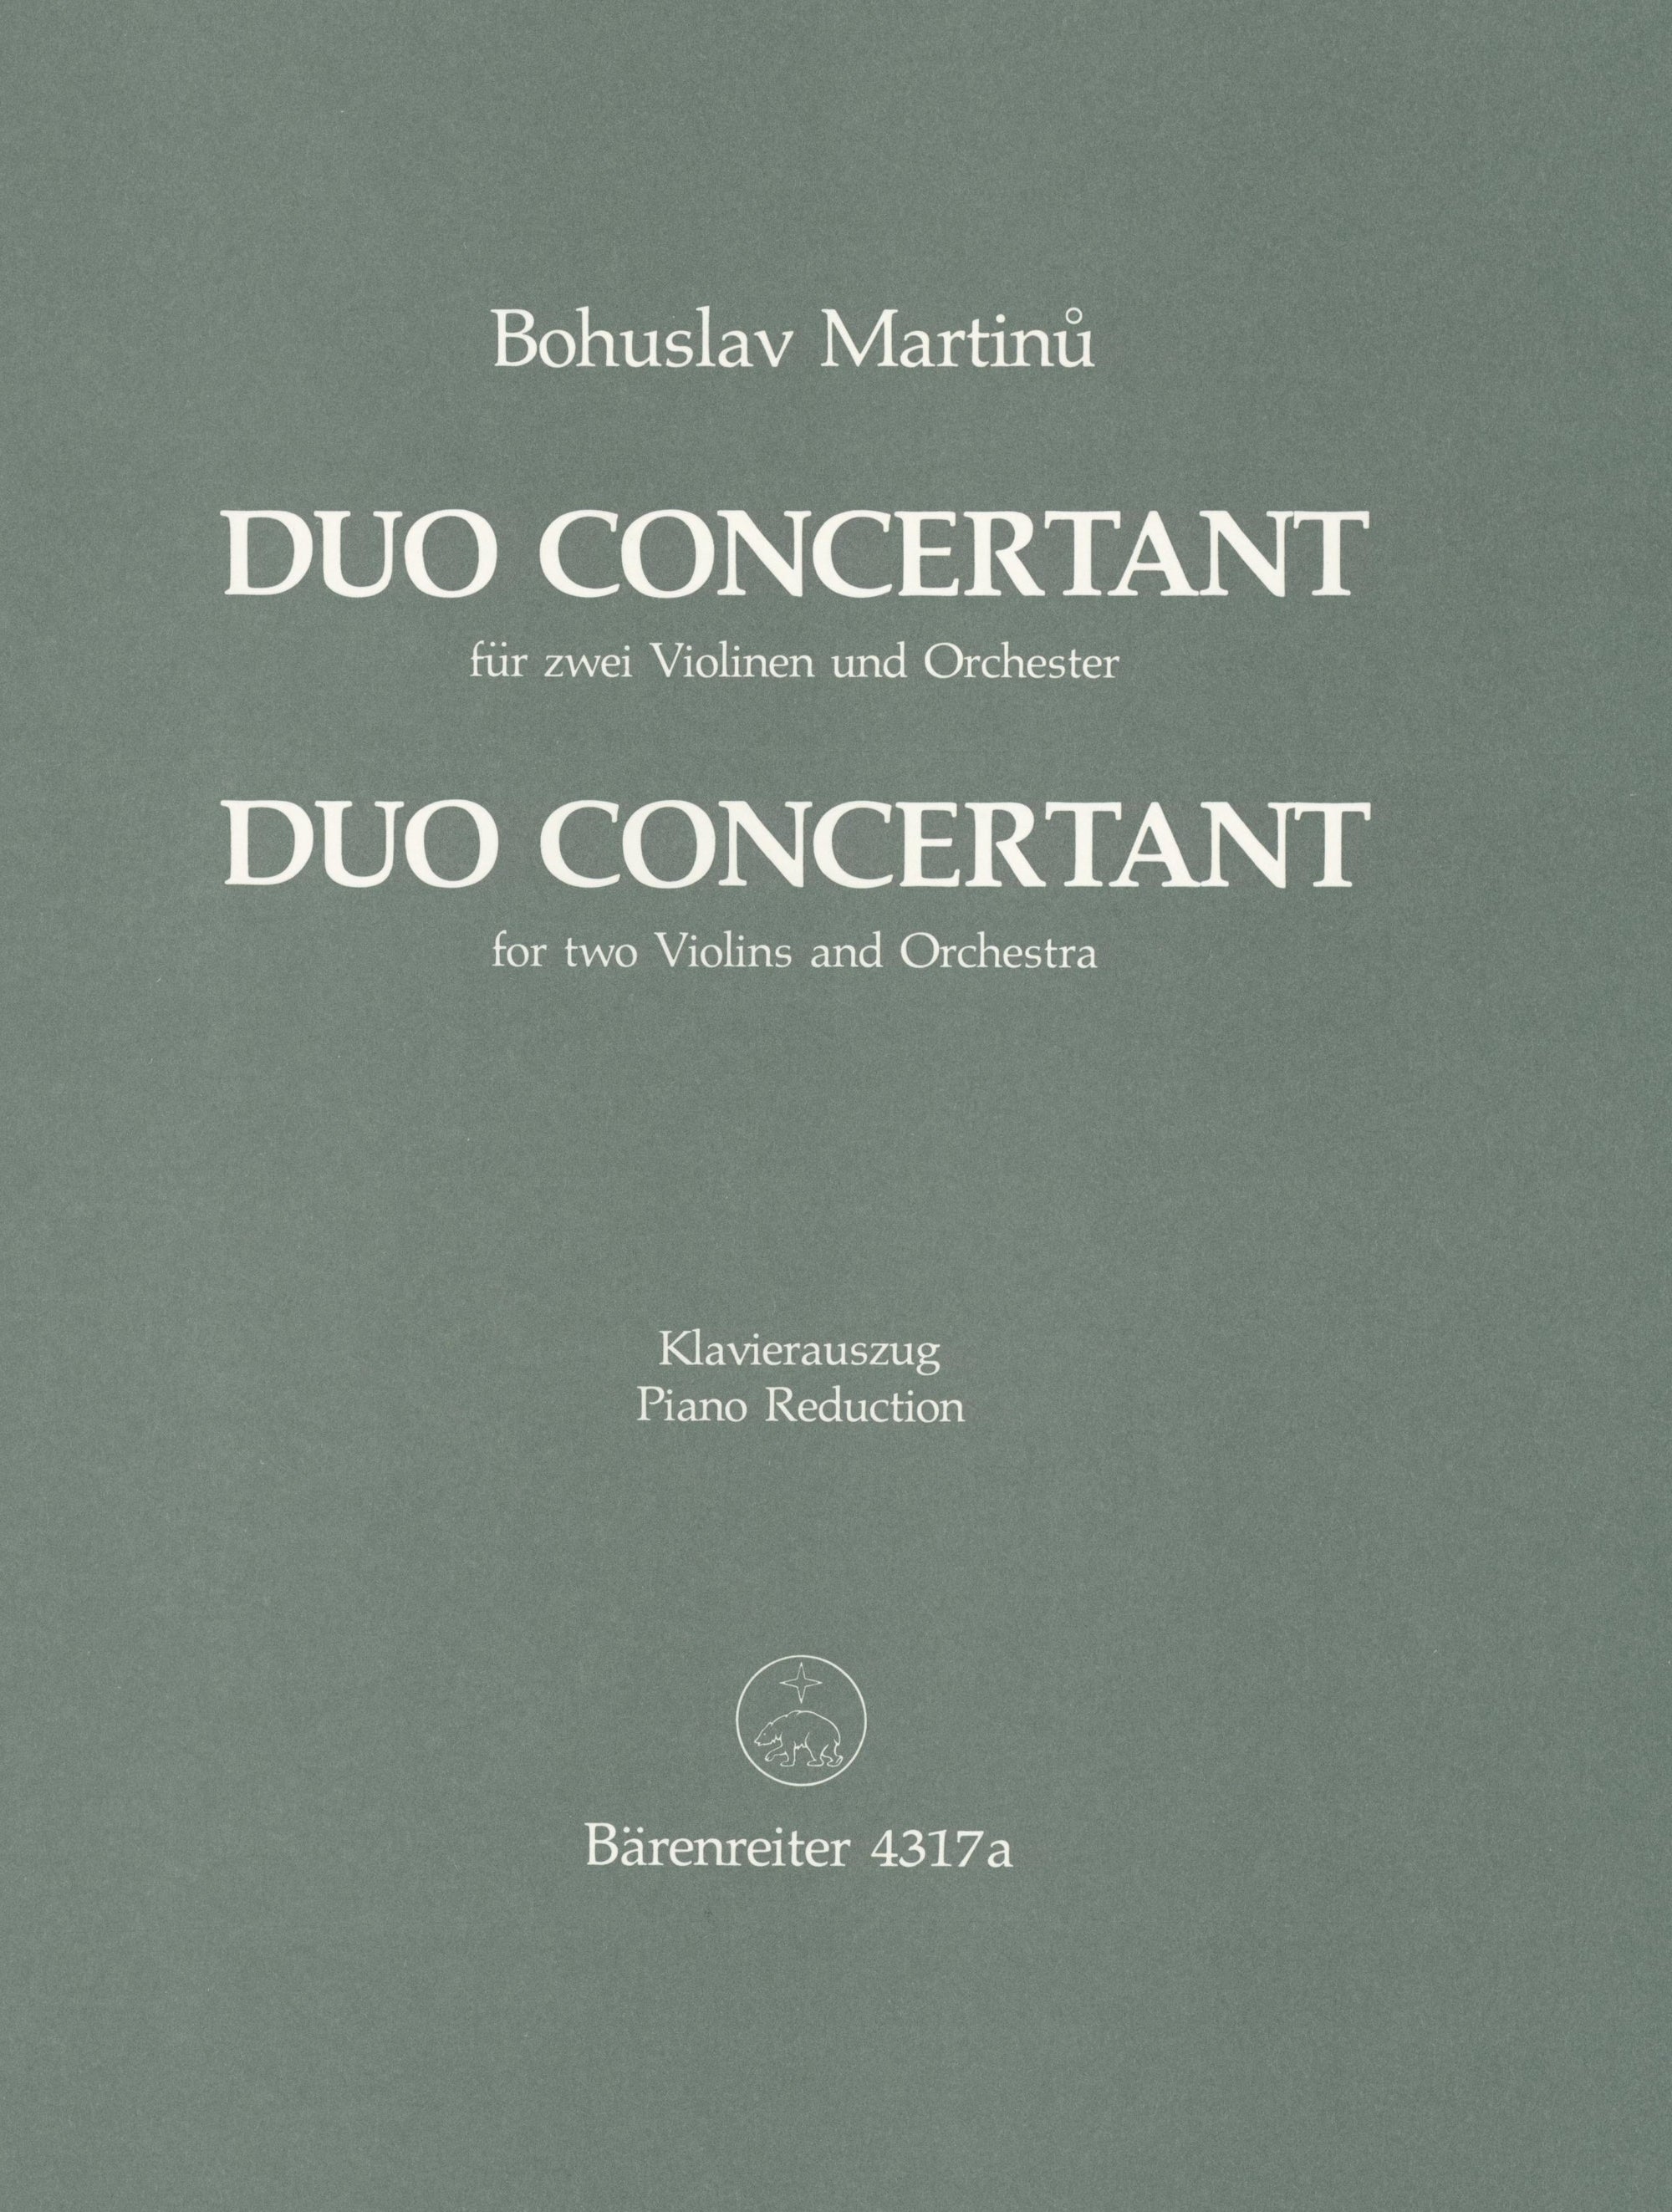 Martinů: Duo Concertant for 2 Violins and Orchestra